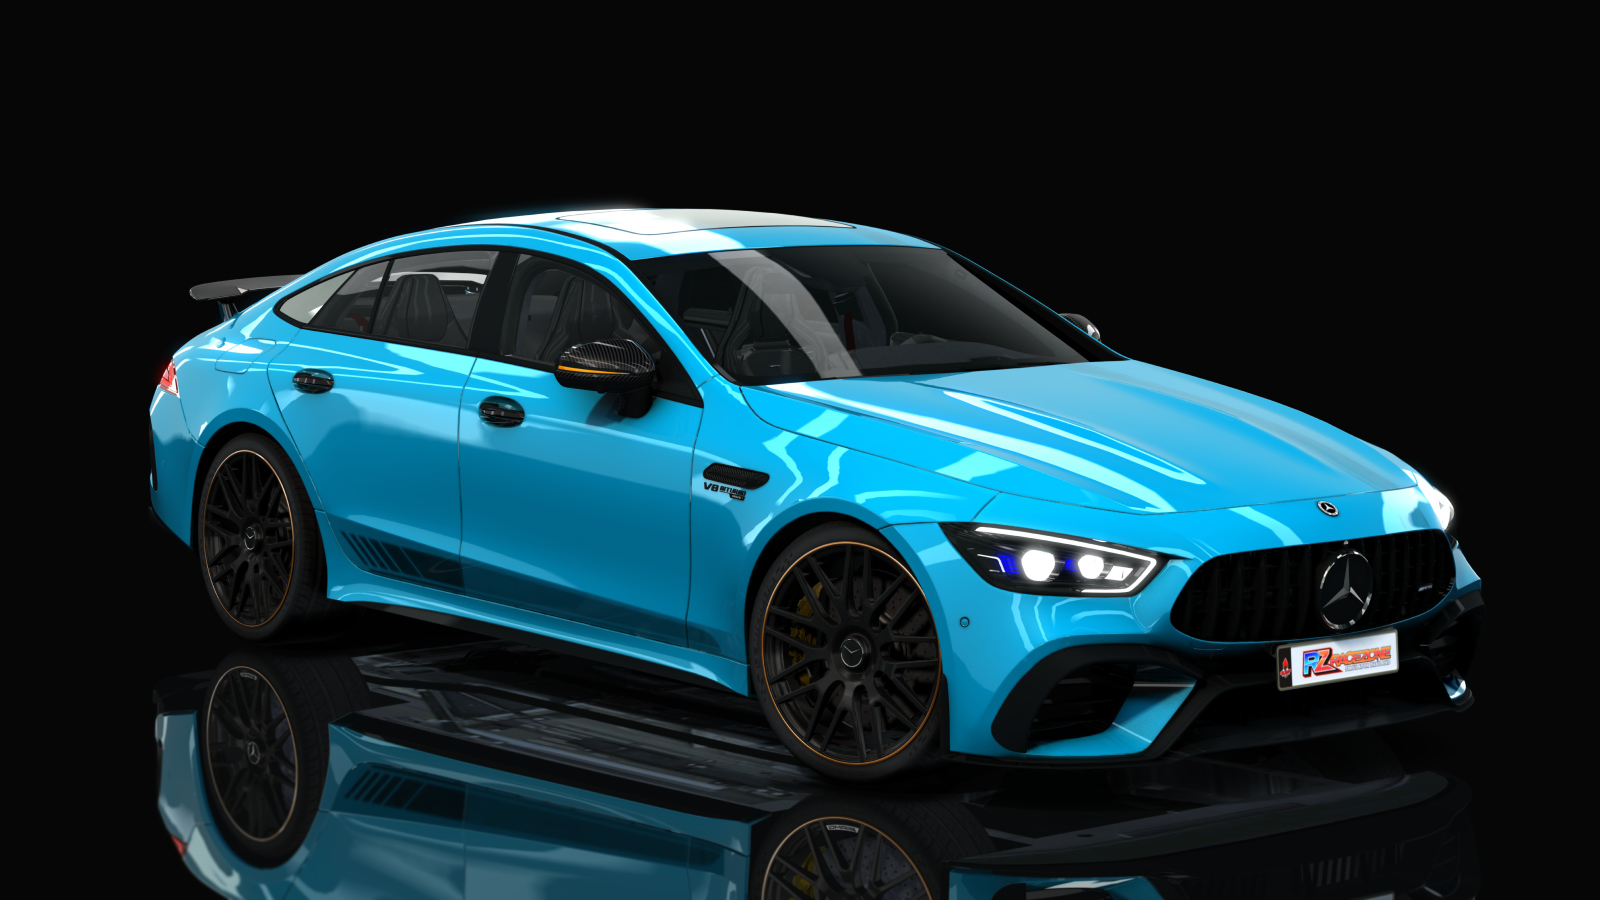 HOTHEAD21 Mercedes-AMG GT63s 2020 Preview Image